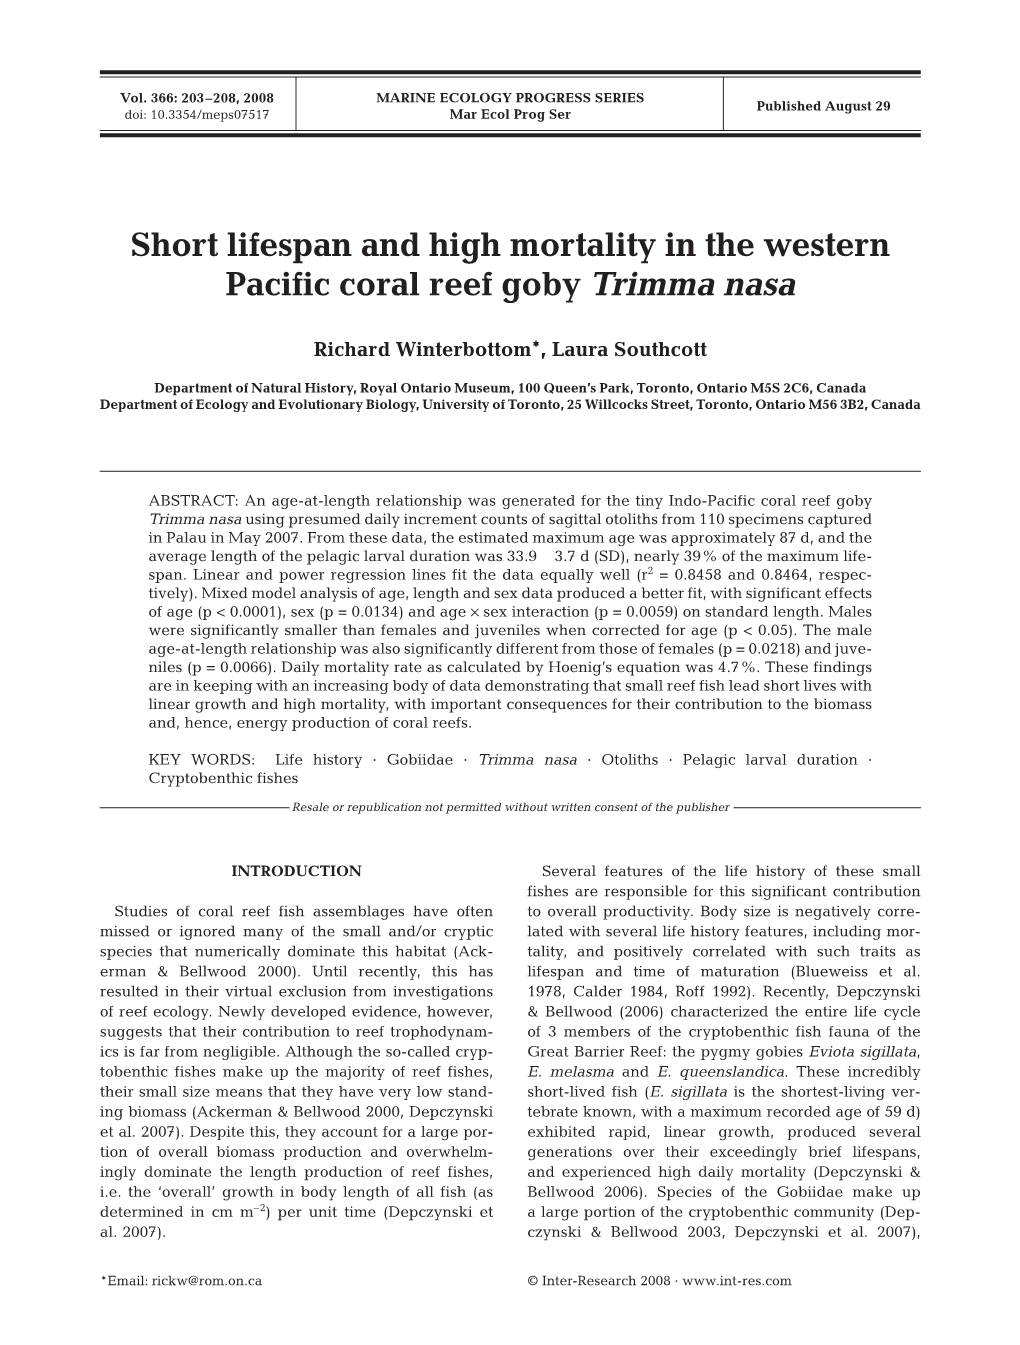 Short Lifespan and High Mortality in the Western Pacific Coral Reef Goby Trimma Nasa